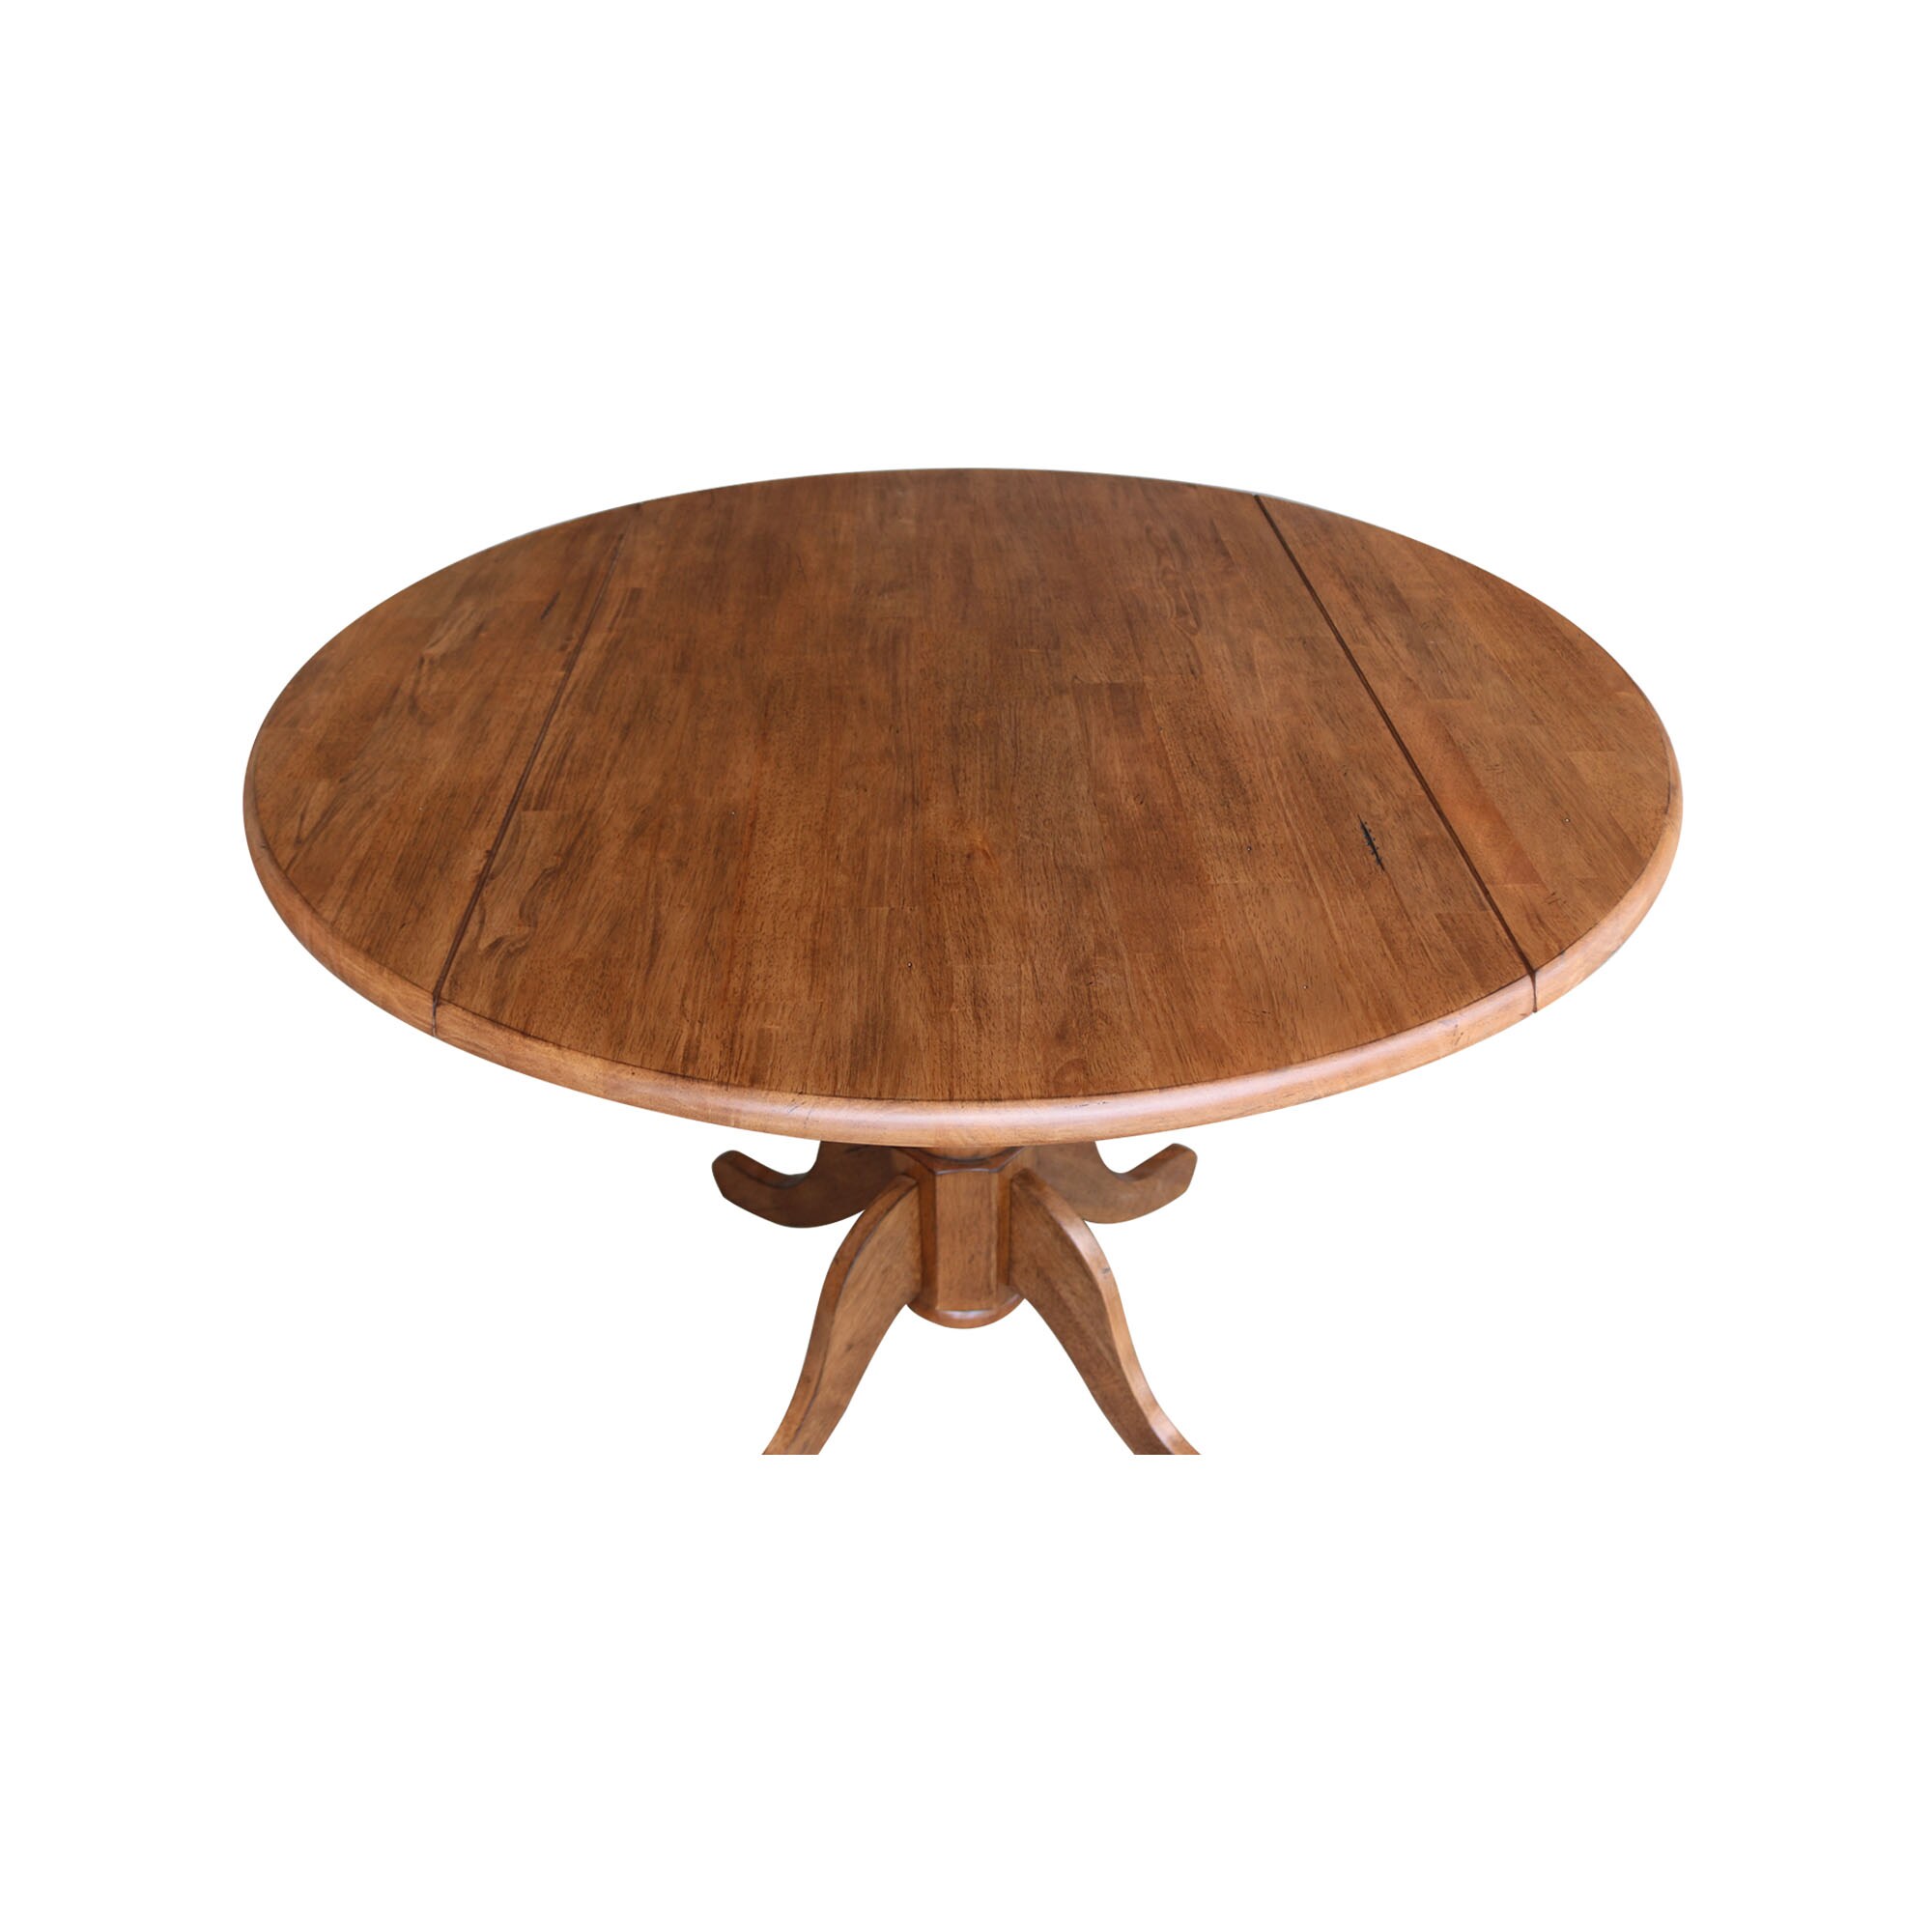 Round 42" Dual Drop Leaf Dining Table in Oak Finish International Concepts 